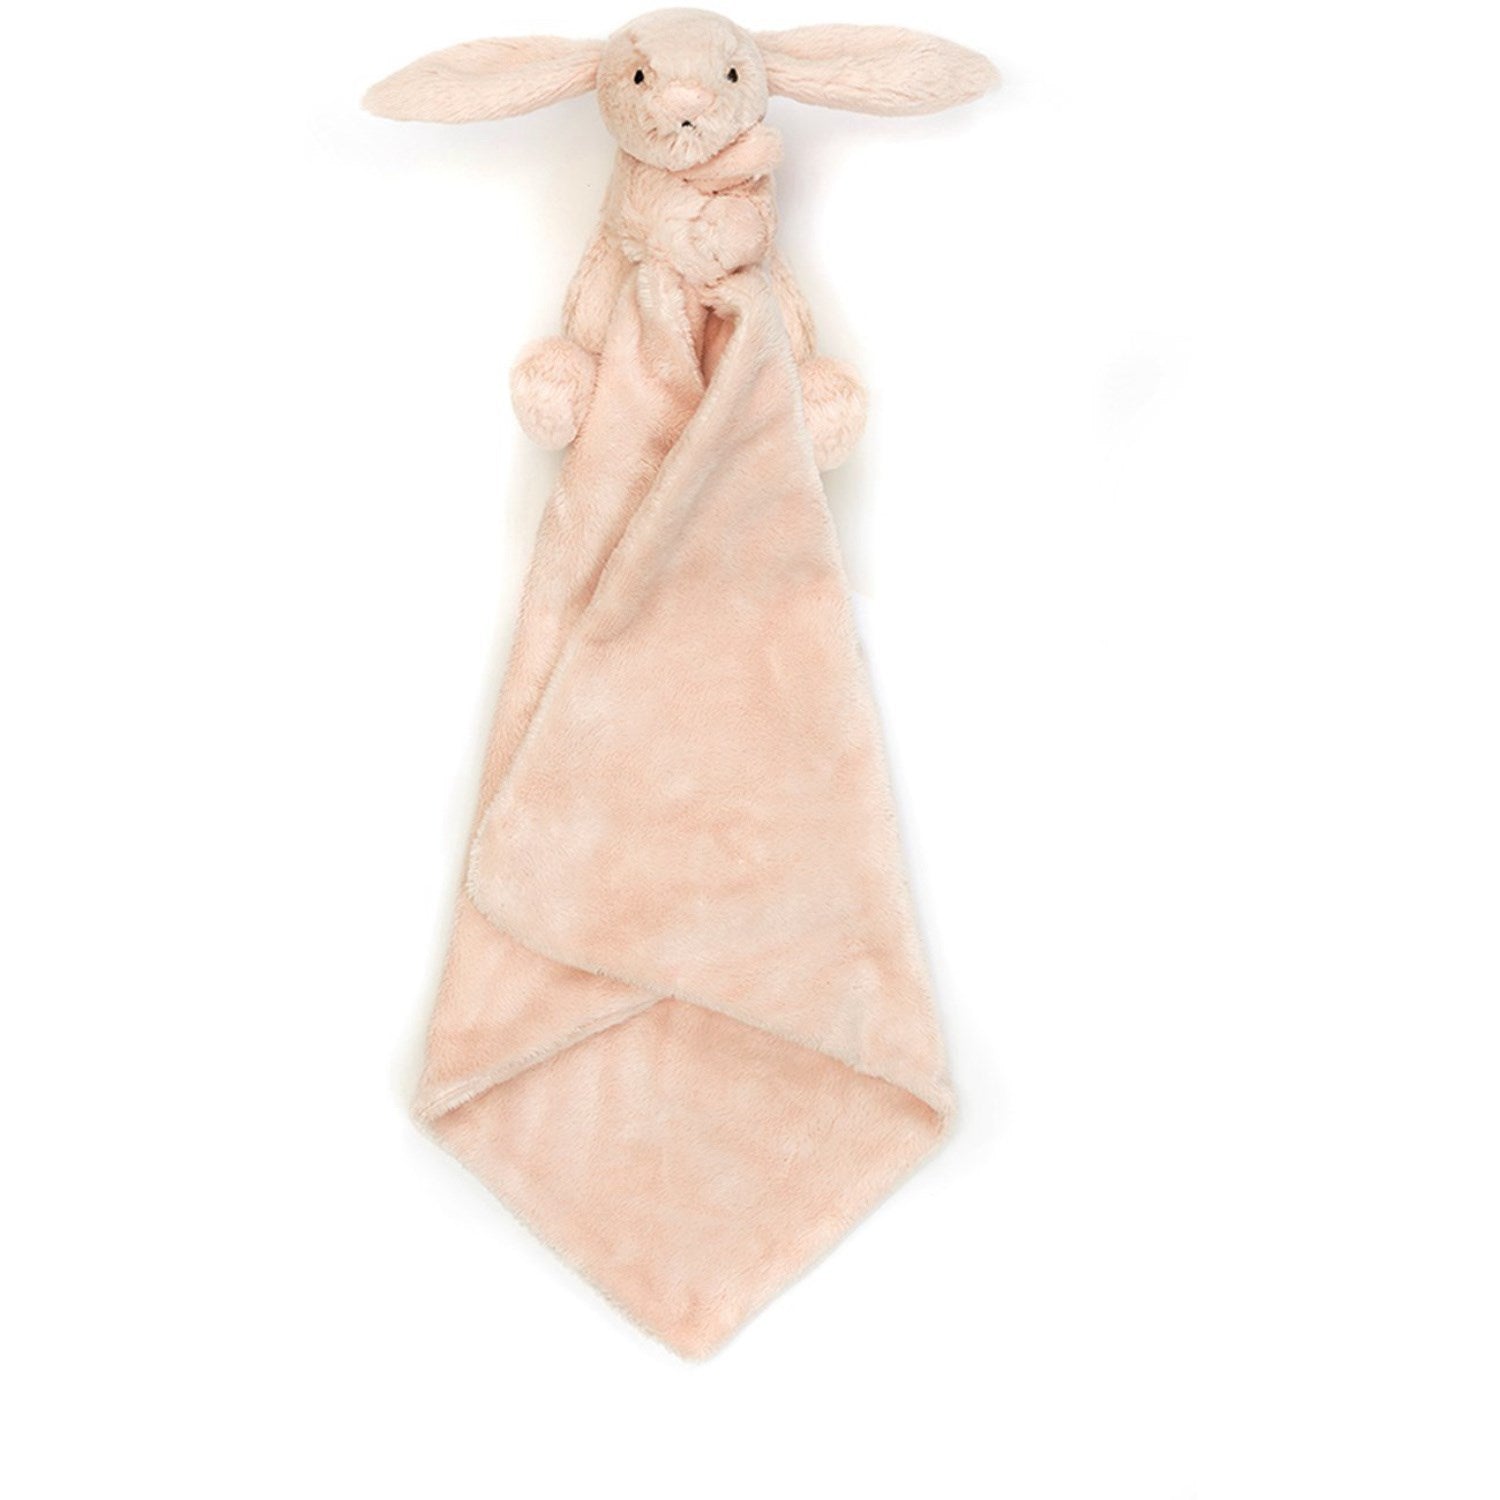 Jellycat Bashful Blush Bunny Soother 2